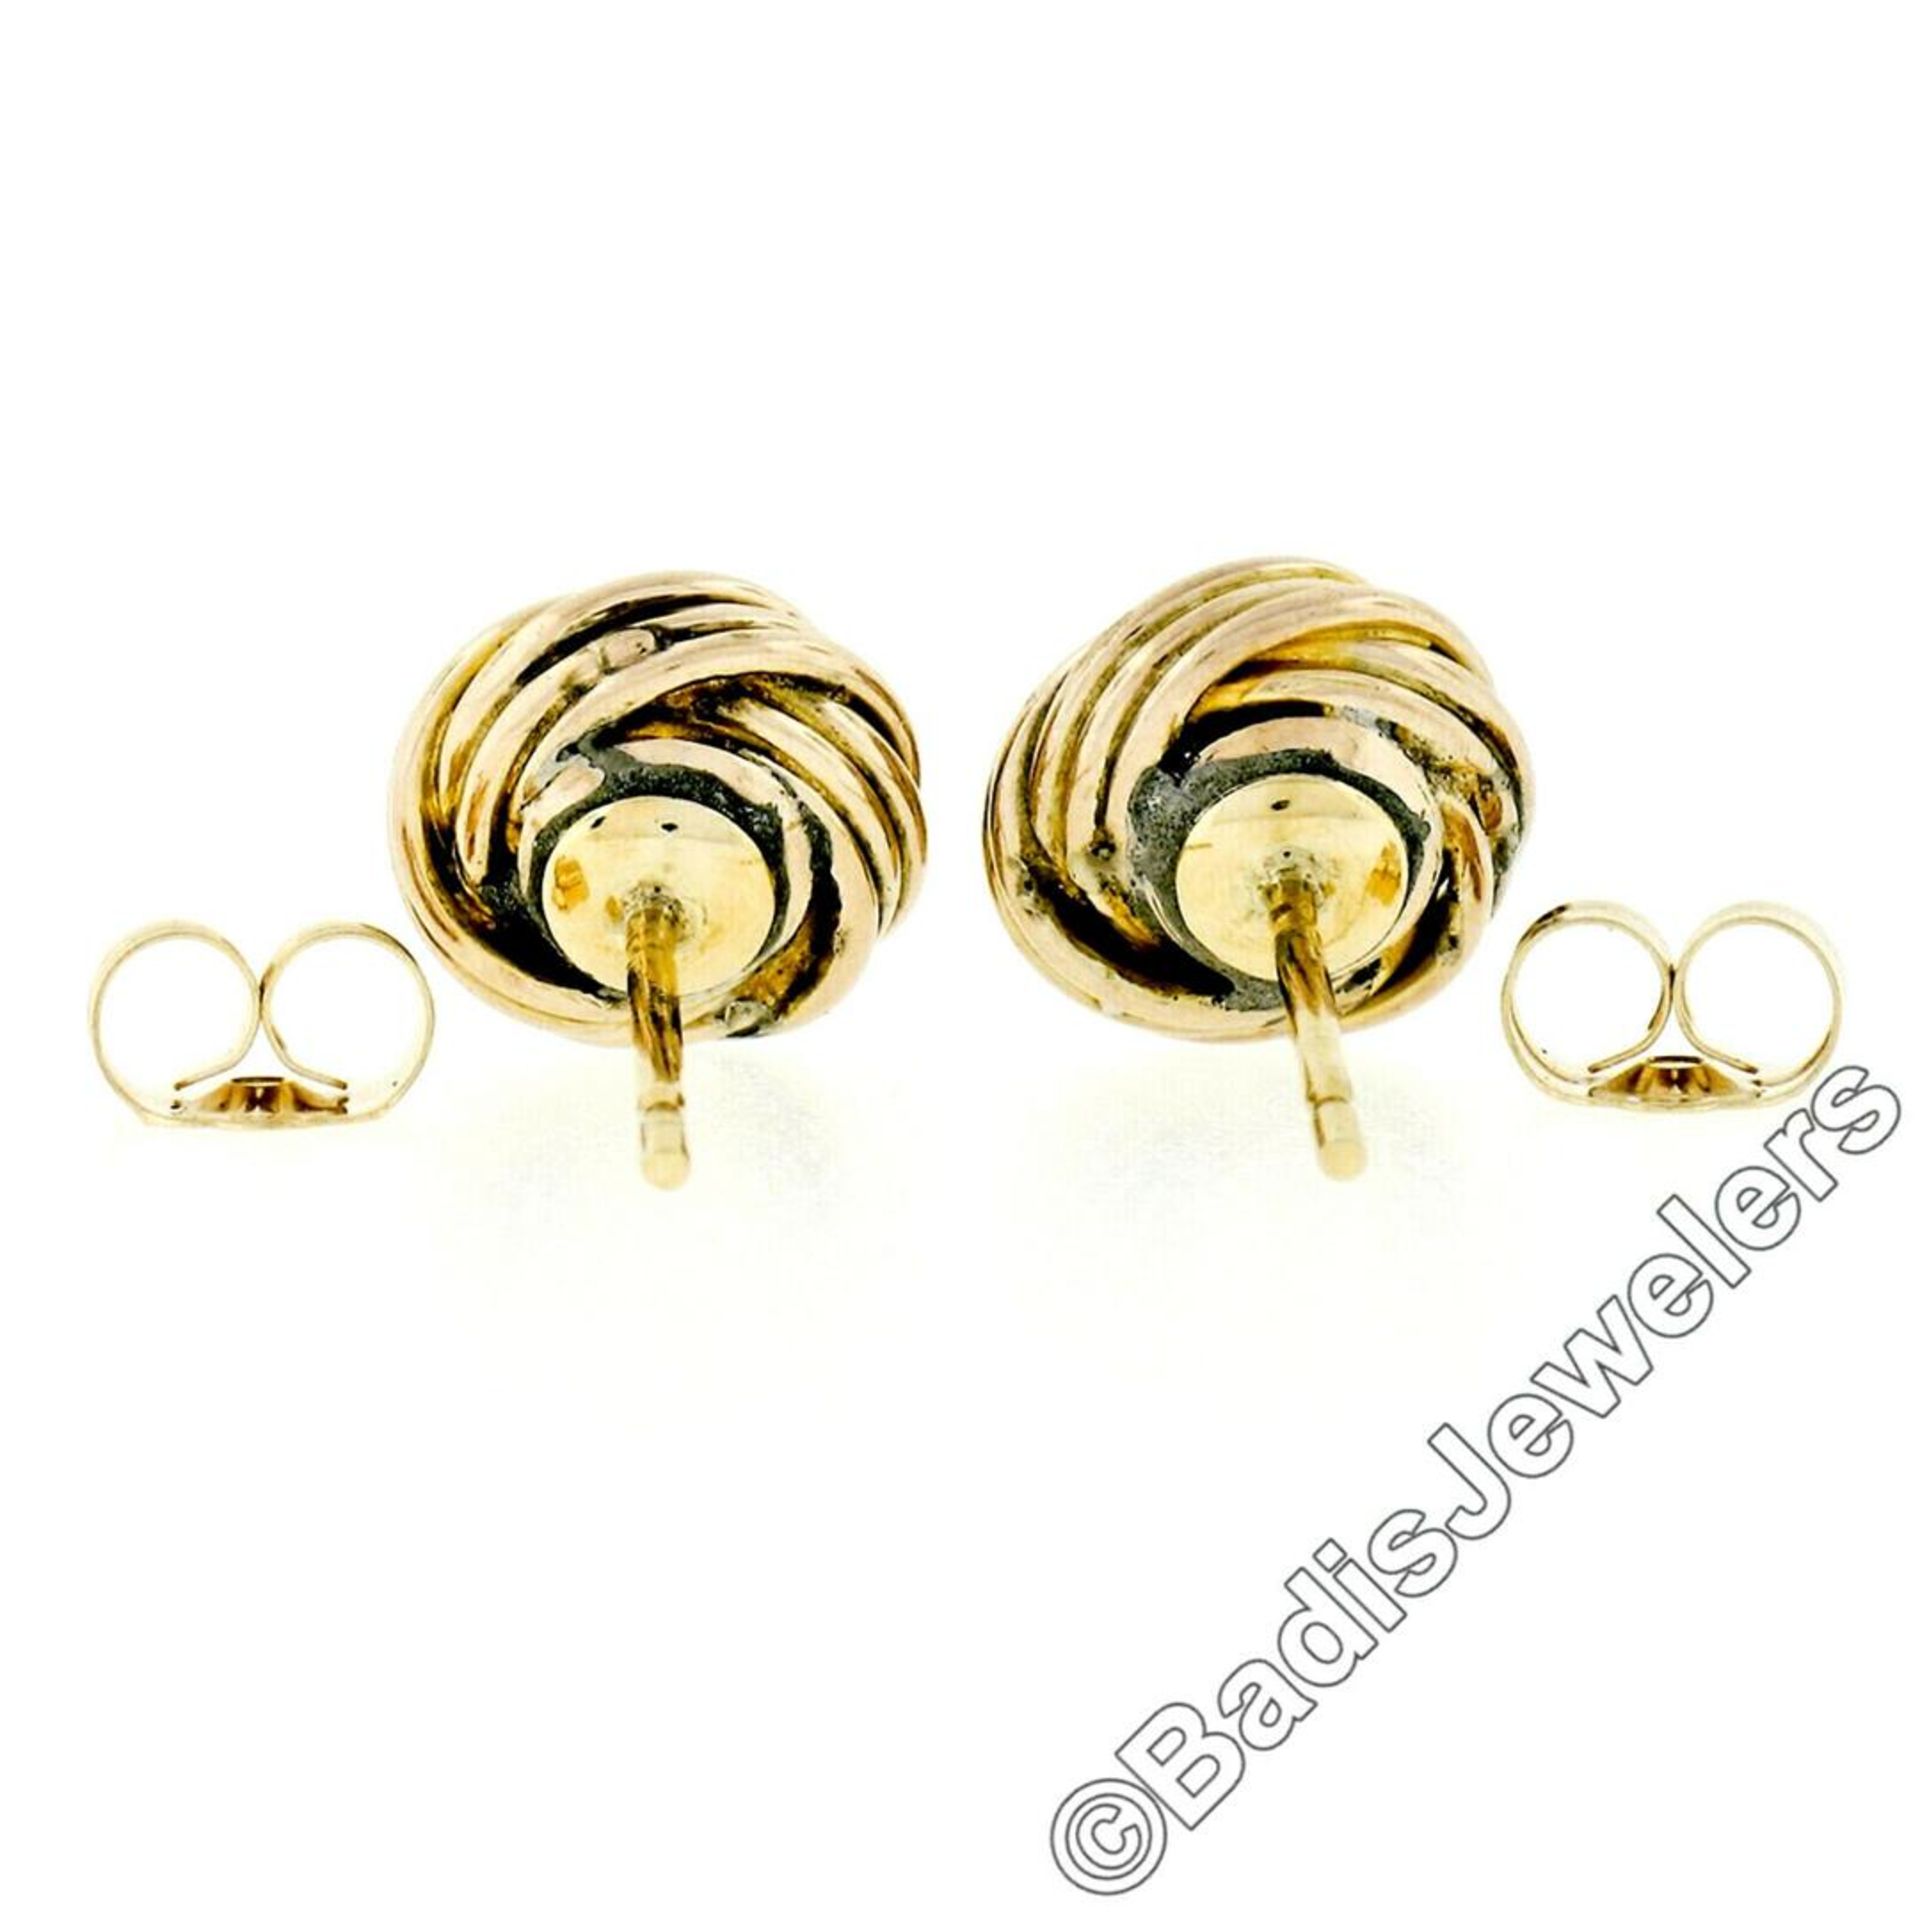 Victorian 14kt Yellow Gold 0.36 ctw Old Mine Cut Diamond Love Knot Stud Earrings - Image 5 of 5